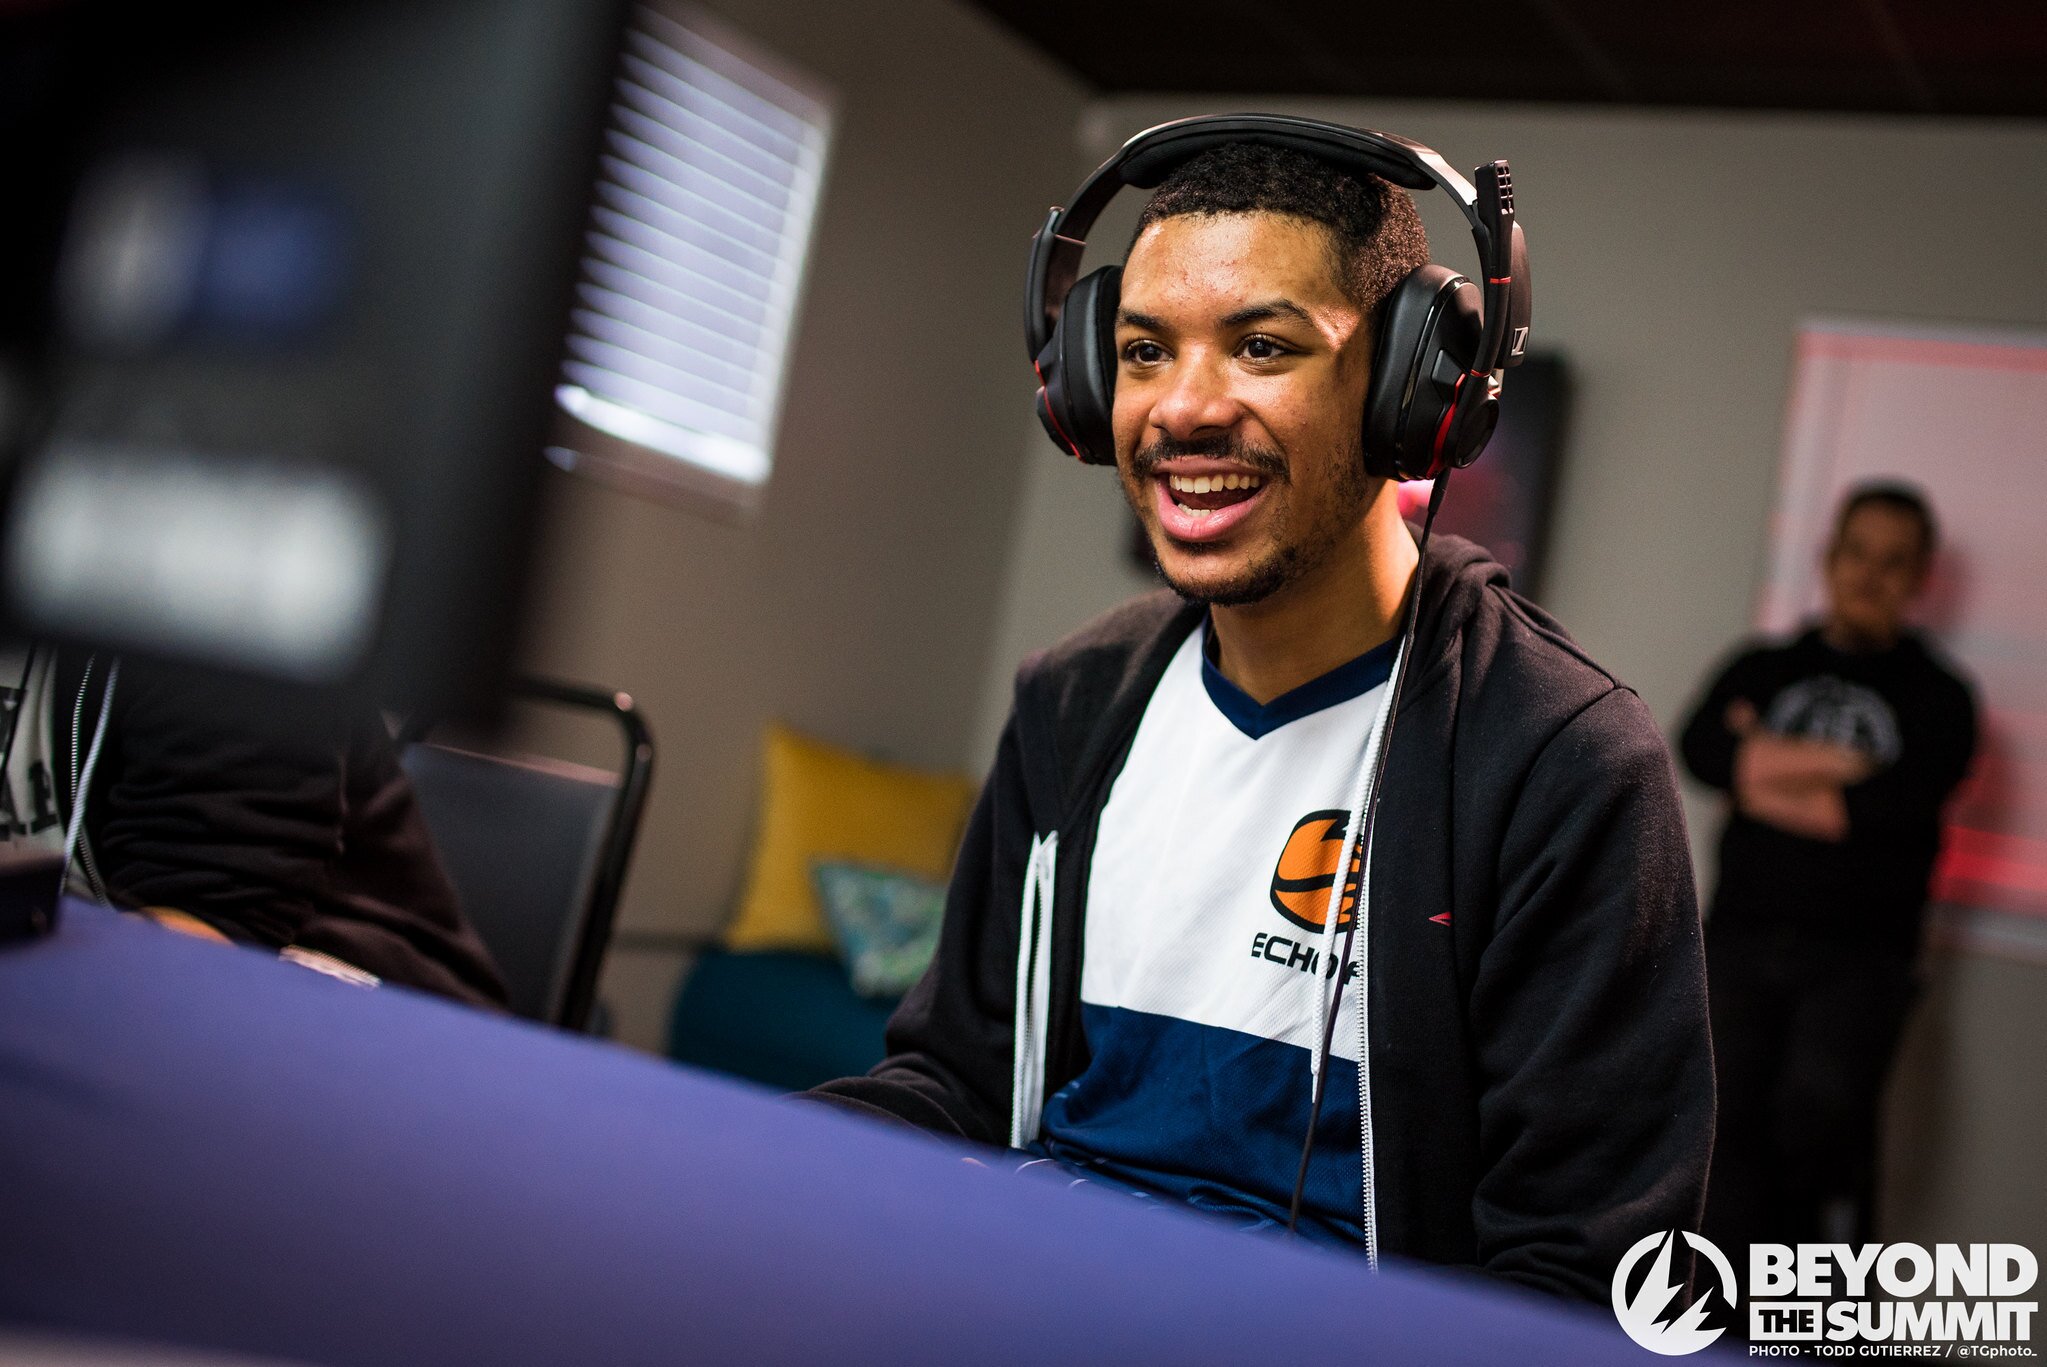 SonicFox, who was the heavy favorite entering the tournament, defeated Ryan “Dragon” Walker 3-0 in the Summit of Time Grand Finals.